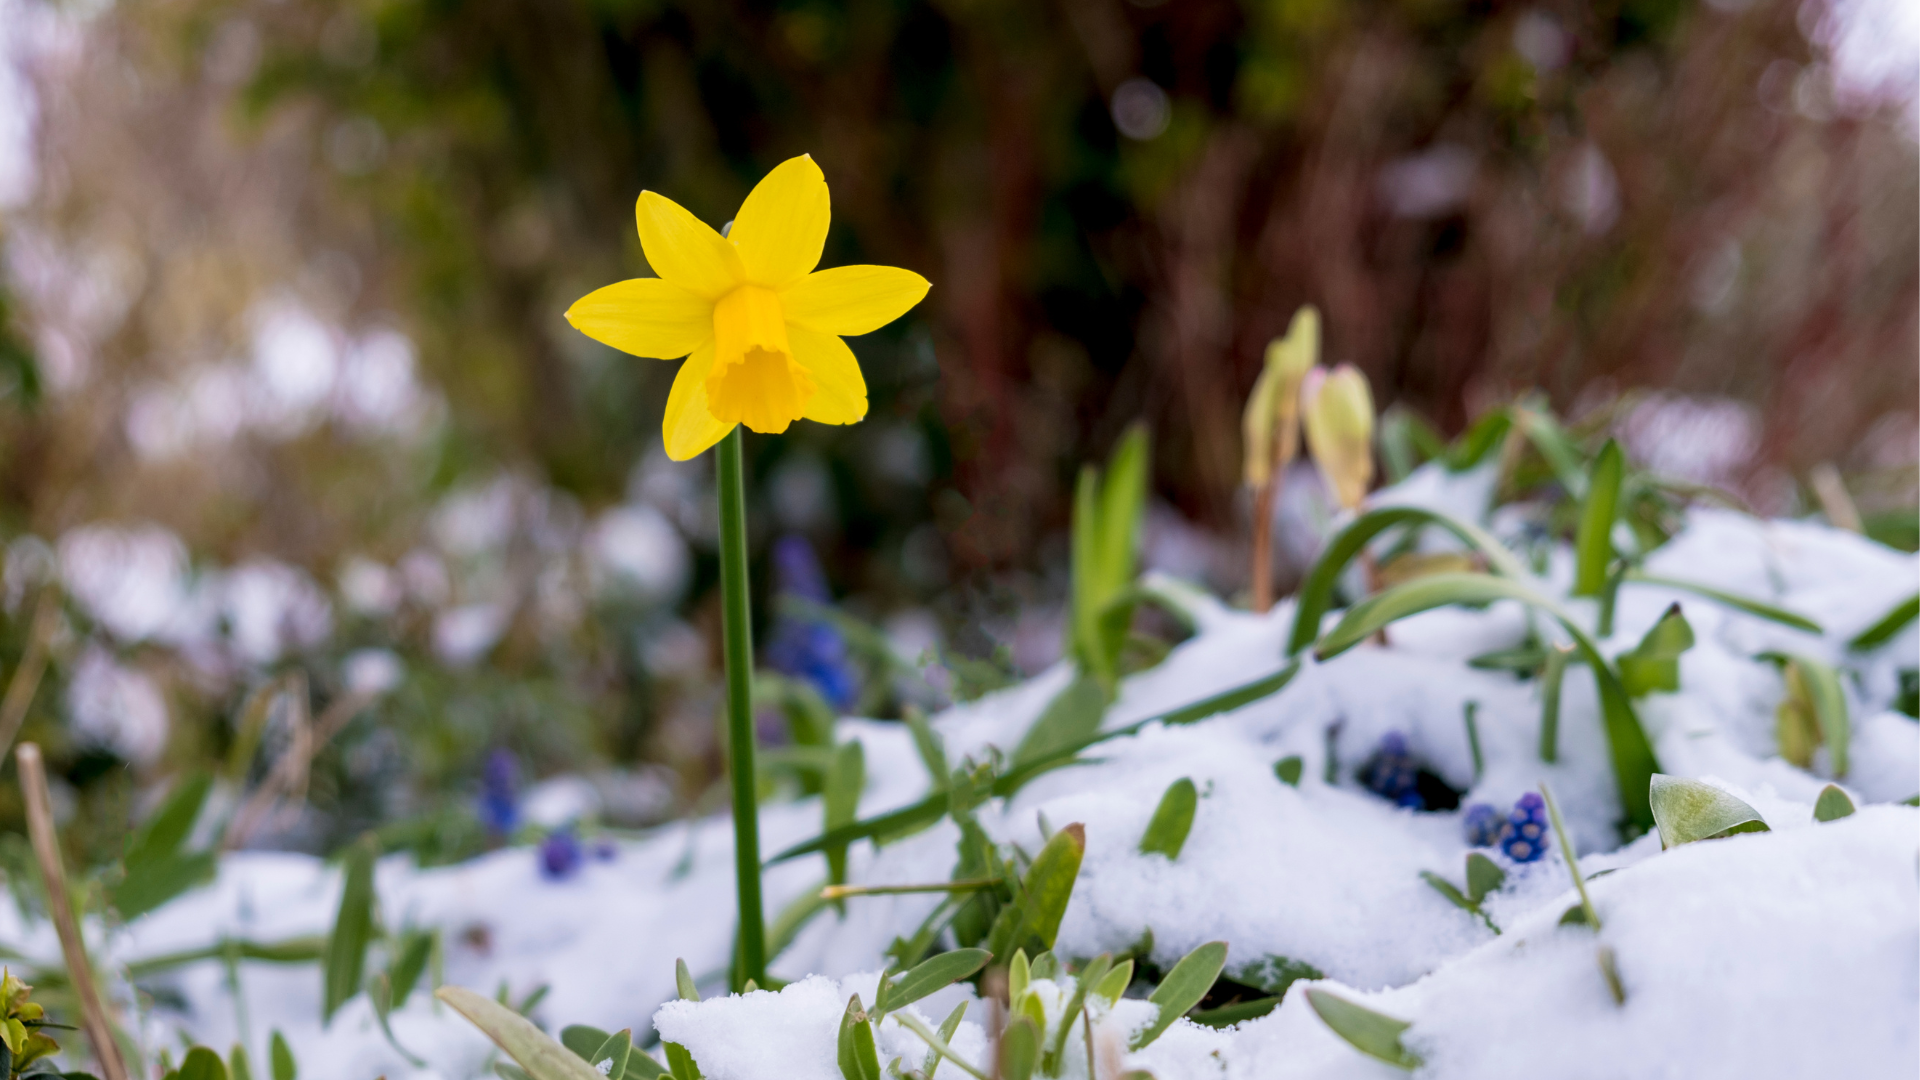 Daffodil and bluebells in the spring, covered in a ground of snow